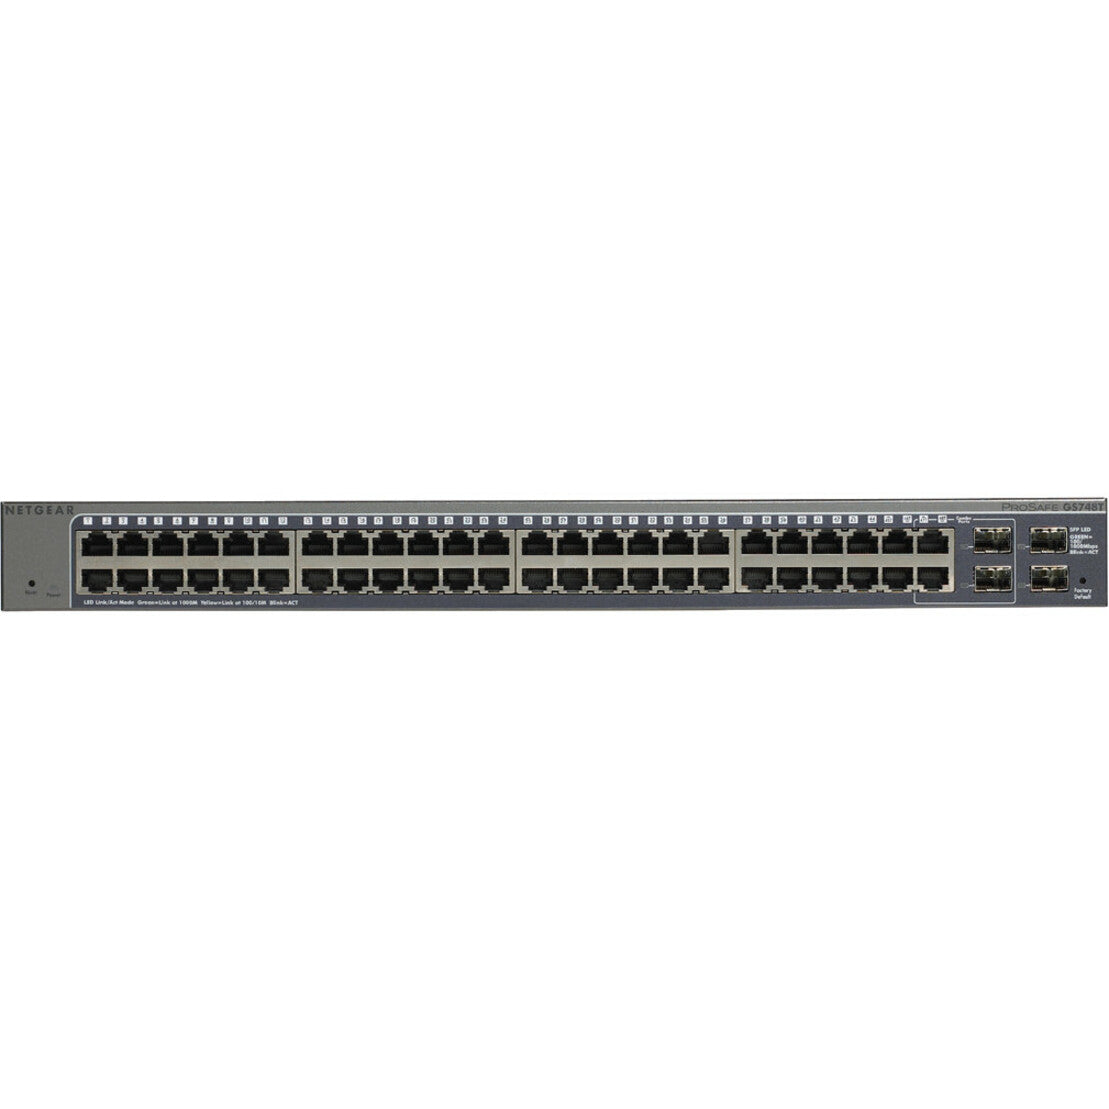 NETGEAR GS748T-500NAS ProSafe 48-Port Gigabit Smart Switch, Reliable and Environmentally Friendly